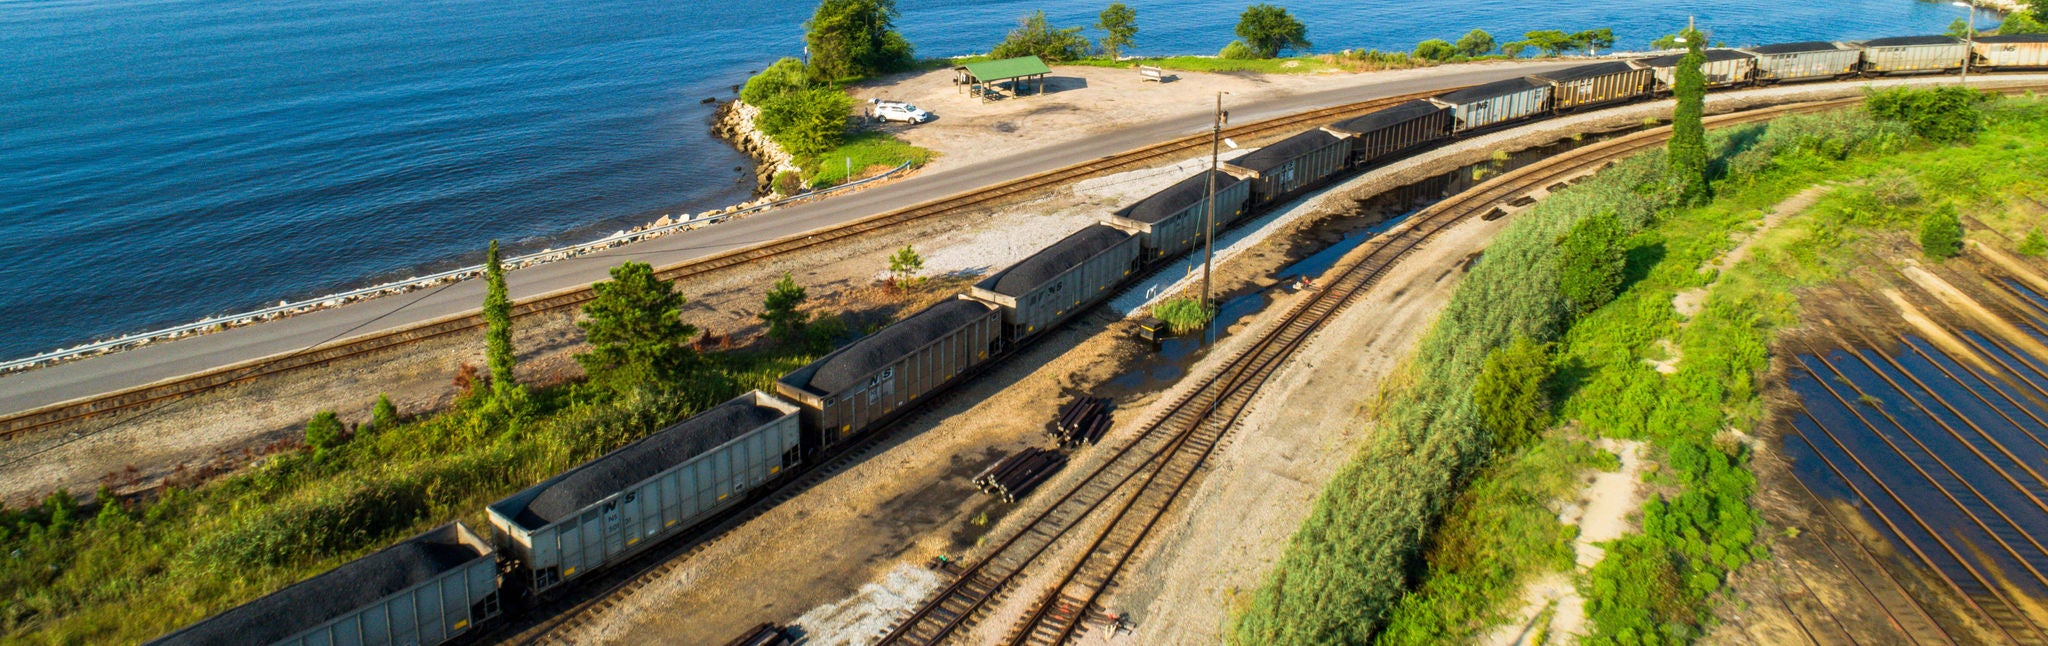 An aerial shot of Norfolk Southern’s coal shipping coal cars moving on a railway along the coast.